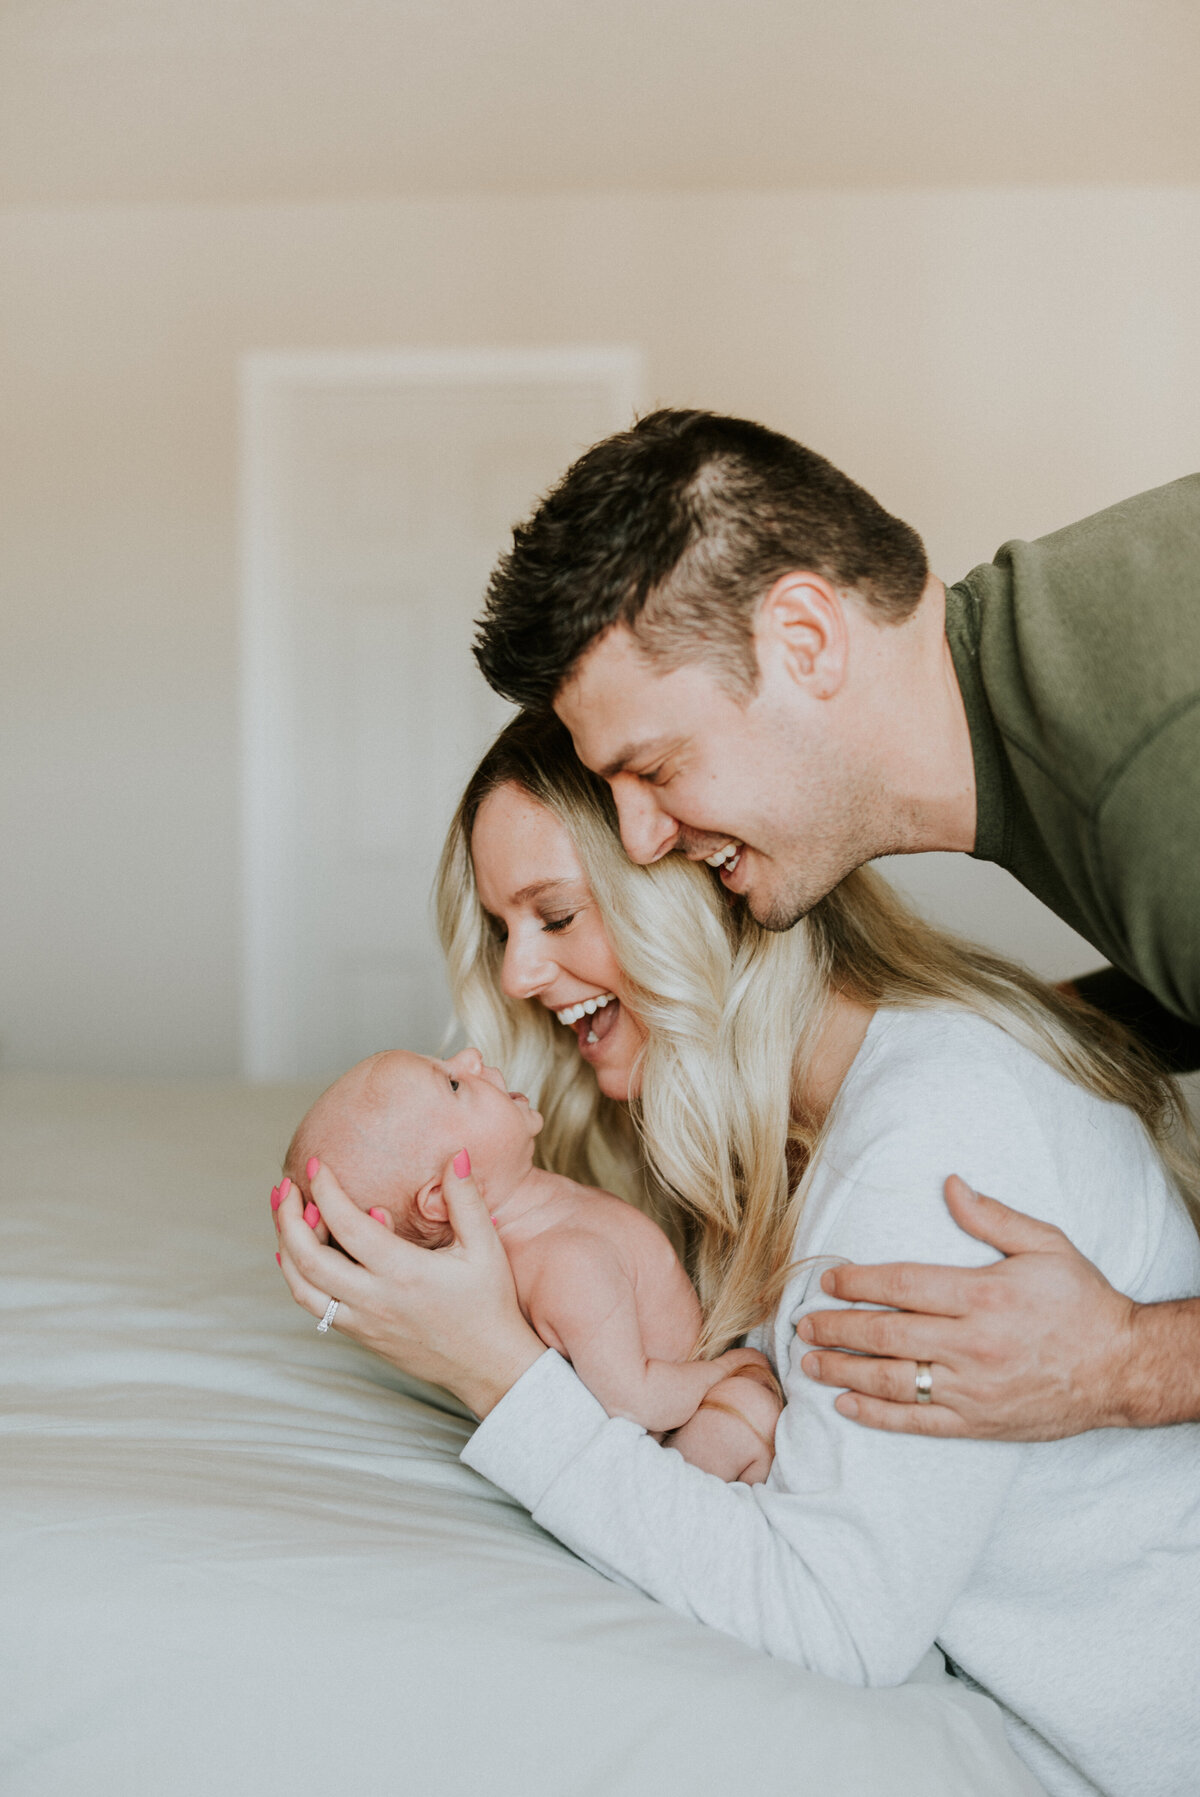 Experience the tenderness of cradling love with cozy newborn portraits in Minneapolis. Shannon Kathleen Photography transforms your home into a haven of sweet memories